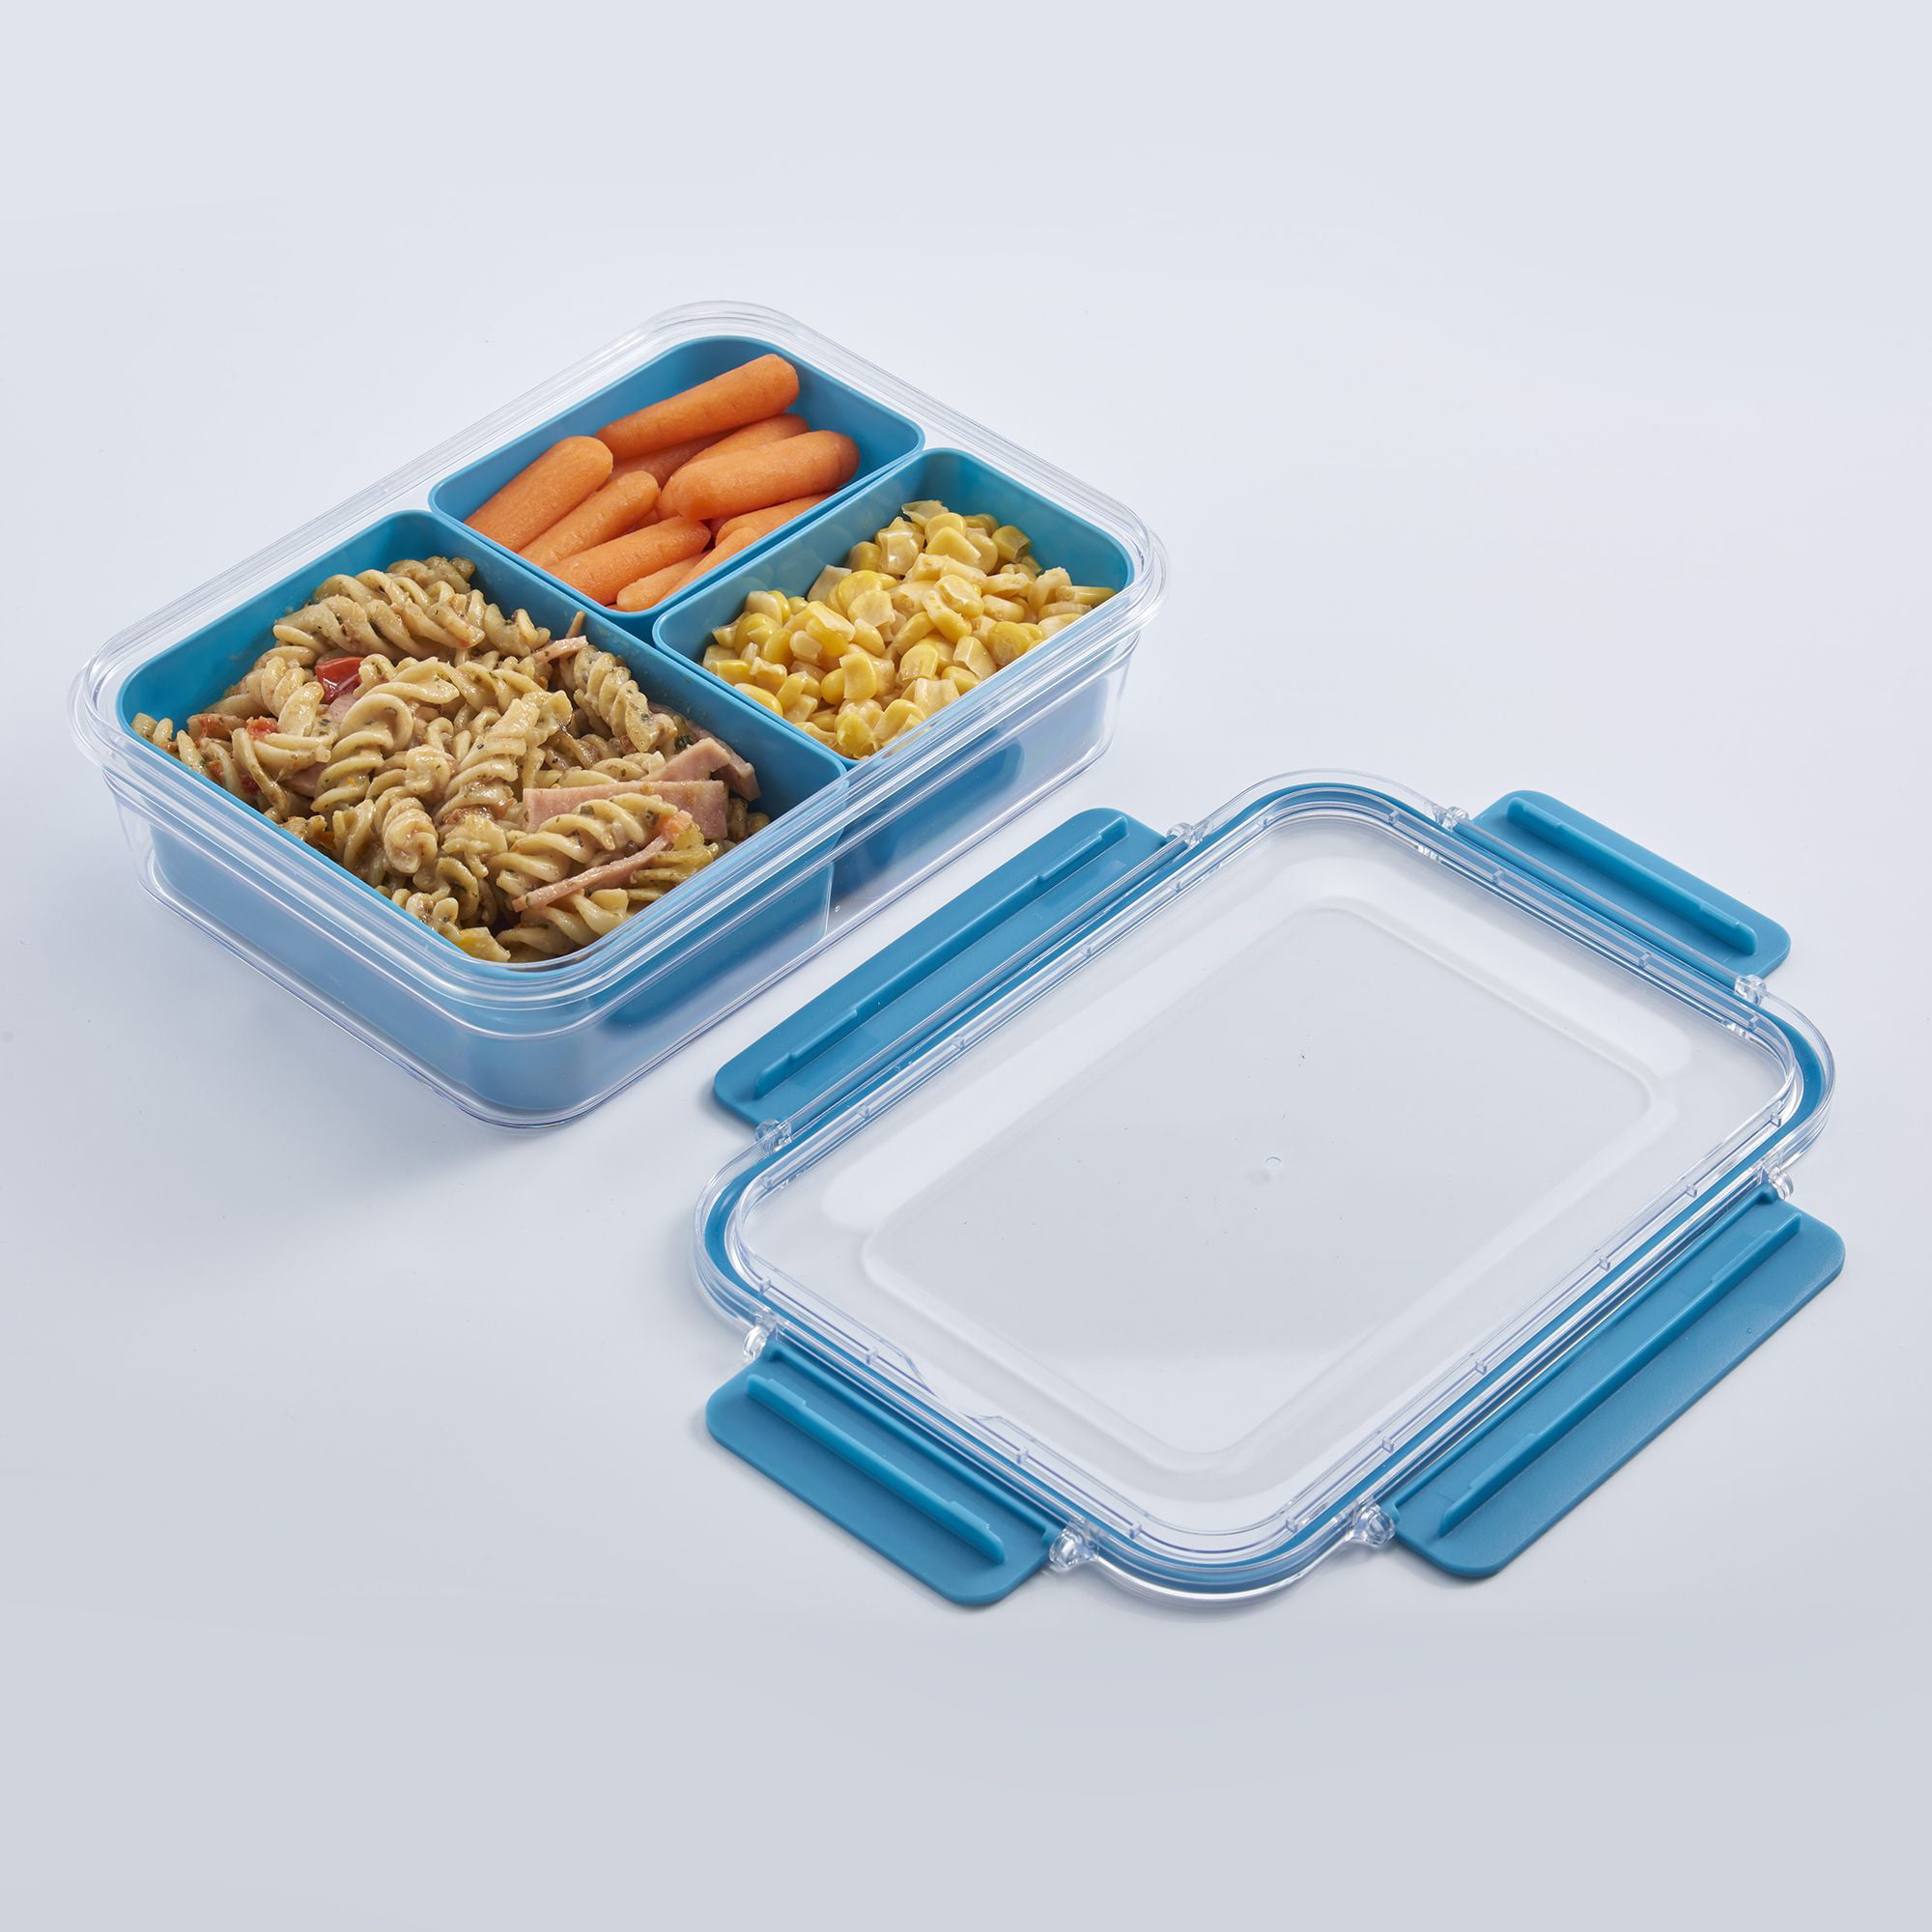 Bento Tek 3.7 x 2.2 x 1.1 inch Sauce Containers, 4 White Dipping Sauce Cups with Lids - with Blue Lid, Microwavable, Plastic Small Lunchbox Containers